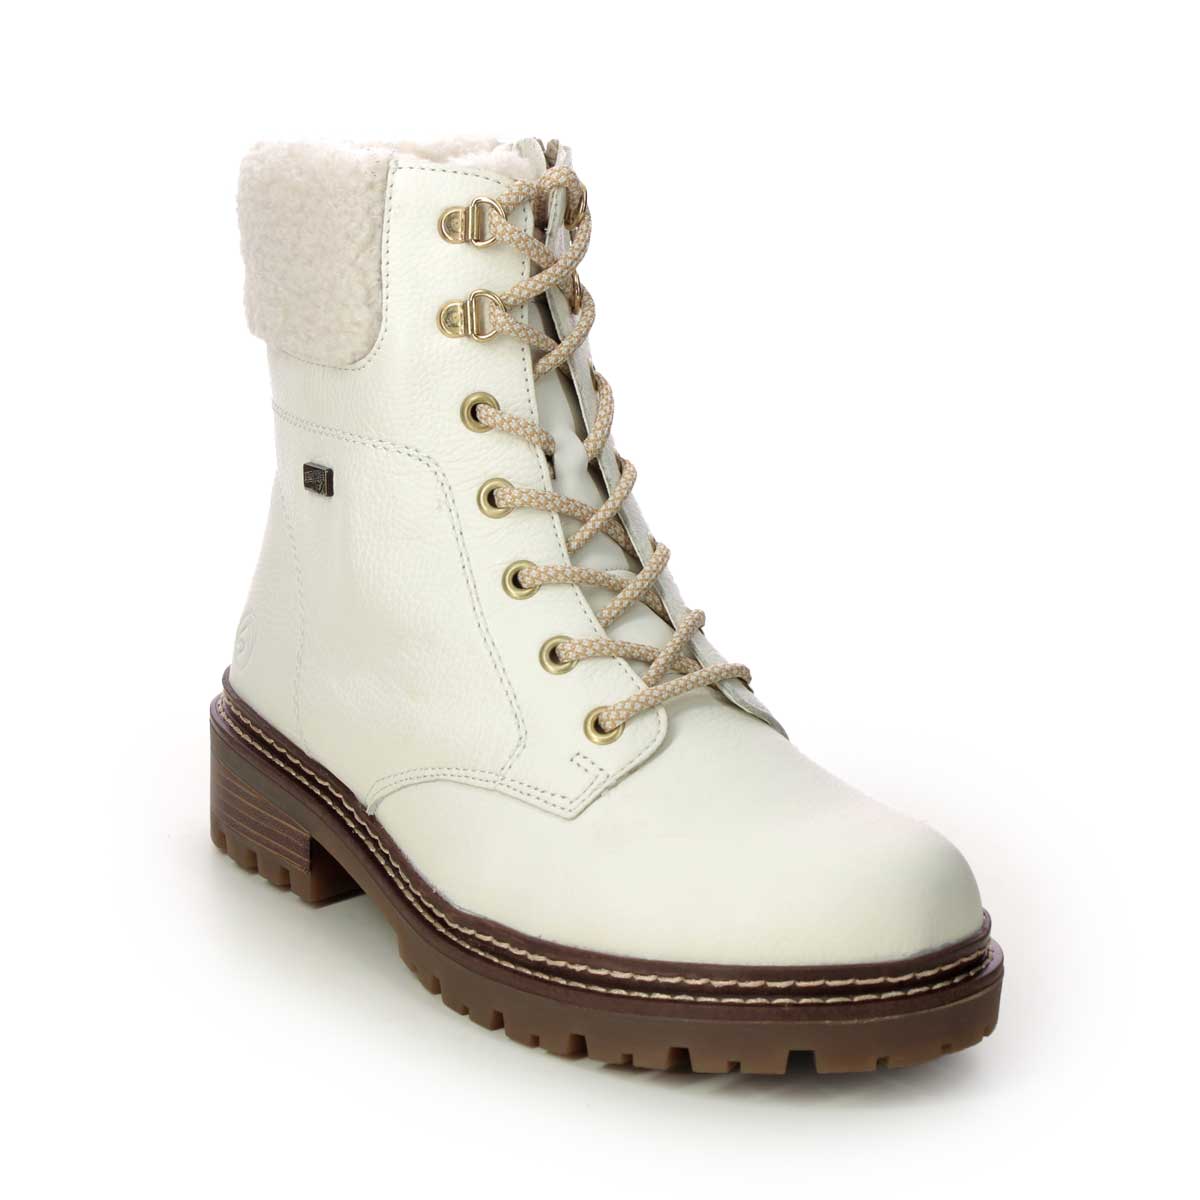 Remonte Astra Teddy Tex White Leather Womens Winter Boots D0B74-81 In Size 40 In Plain White Leather